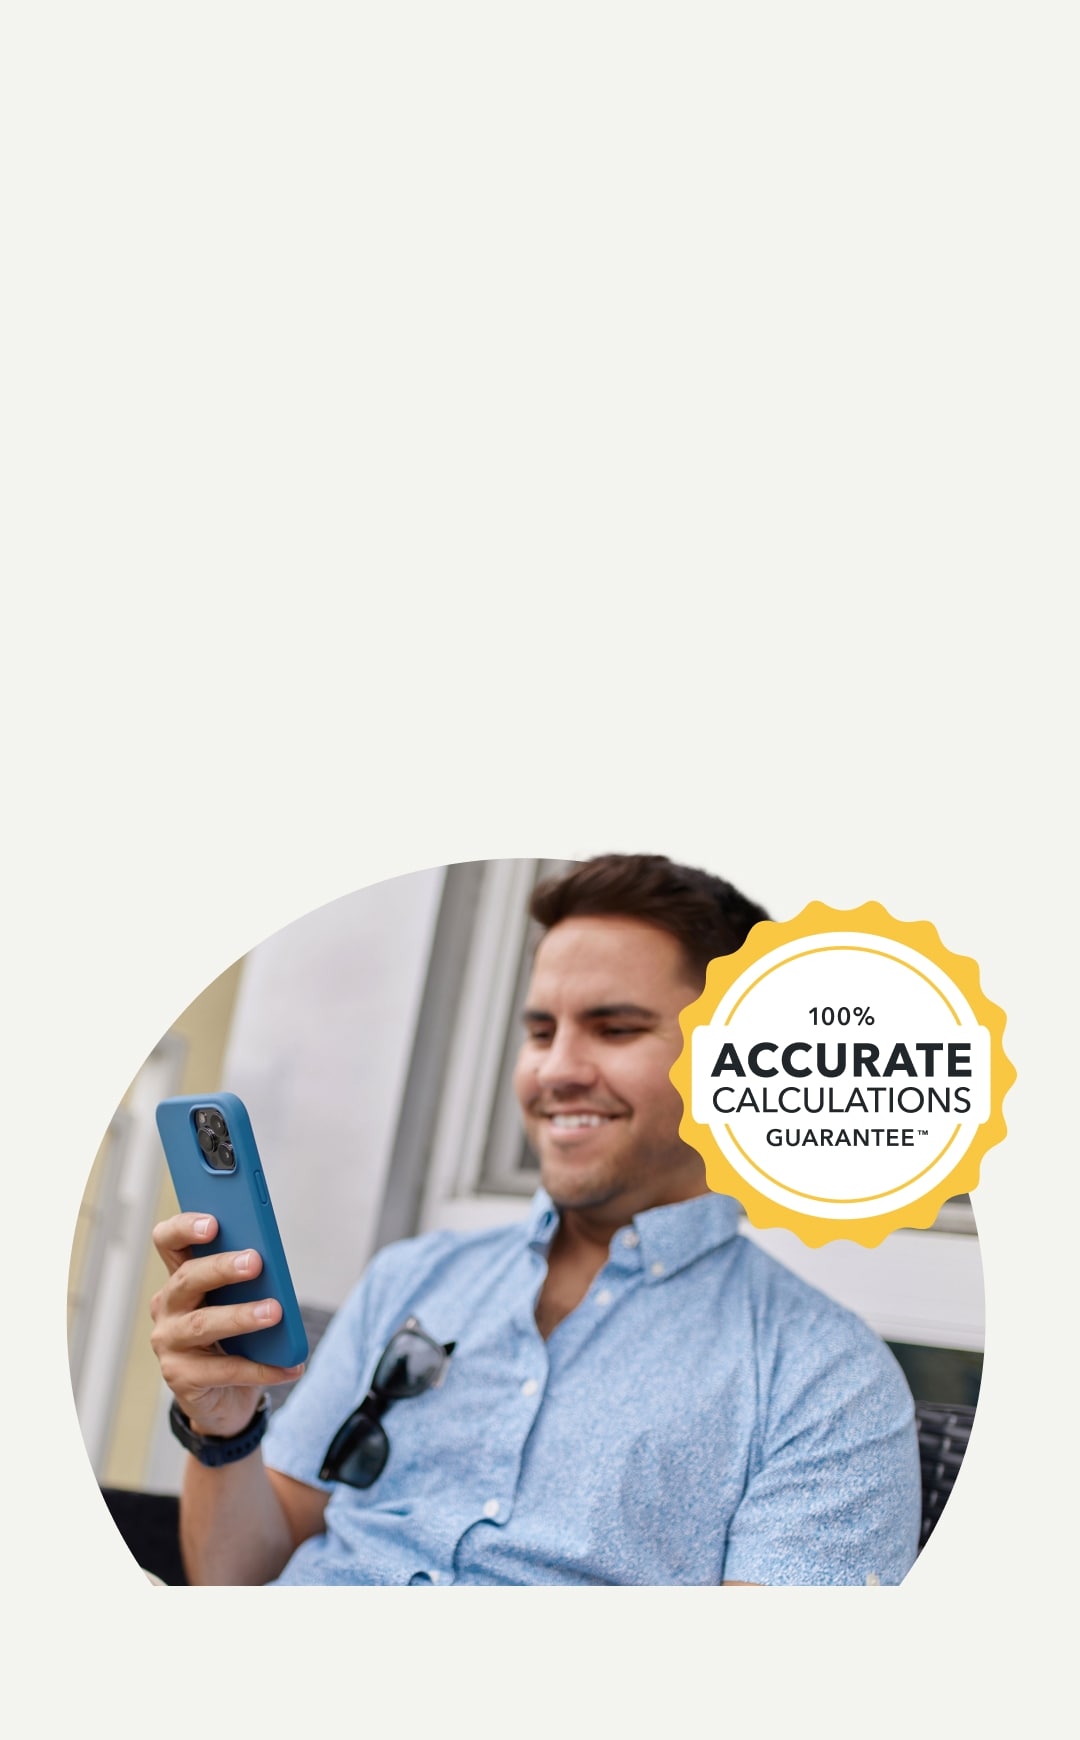 TurboTax customer is smiling as he looks down at his phone in his hands.